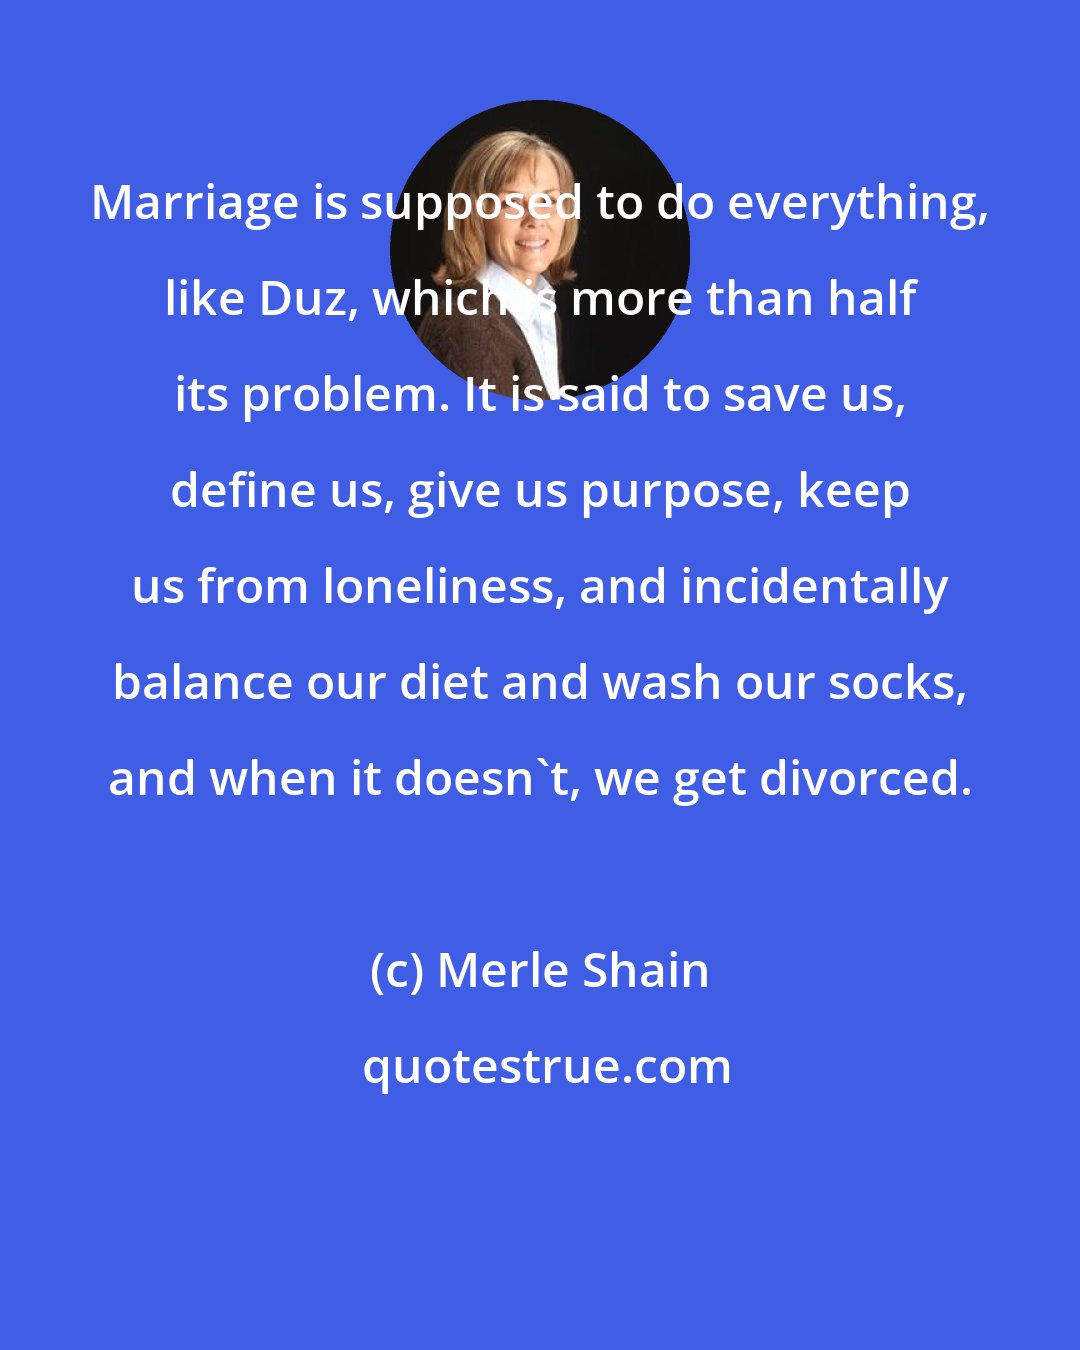 Merle Shain: Marriage is supposed to do everything, like Duz, which is more than half its problem. It is said to save us, define us, give us purpose, keep us from loneliness, and incidentally balance our diet and wash our socks, and when it doesn't, we get divorced.